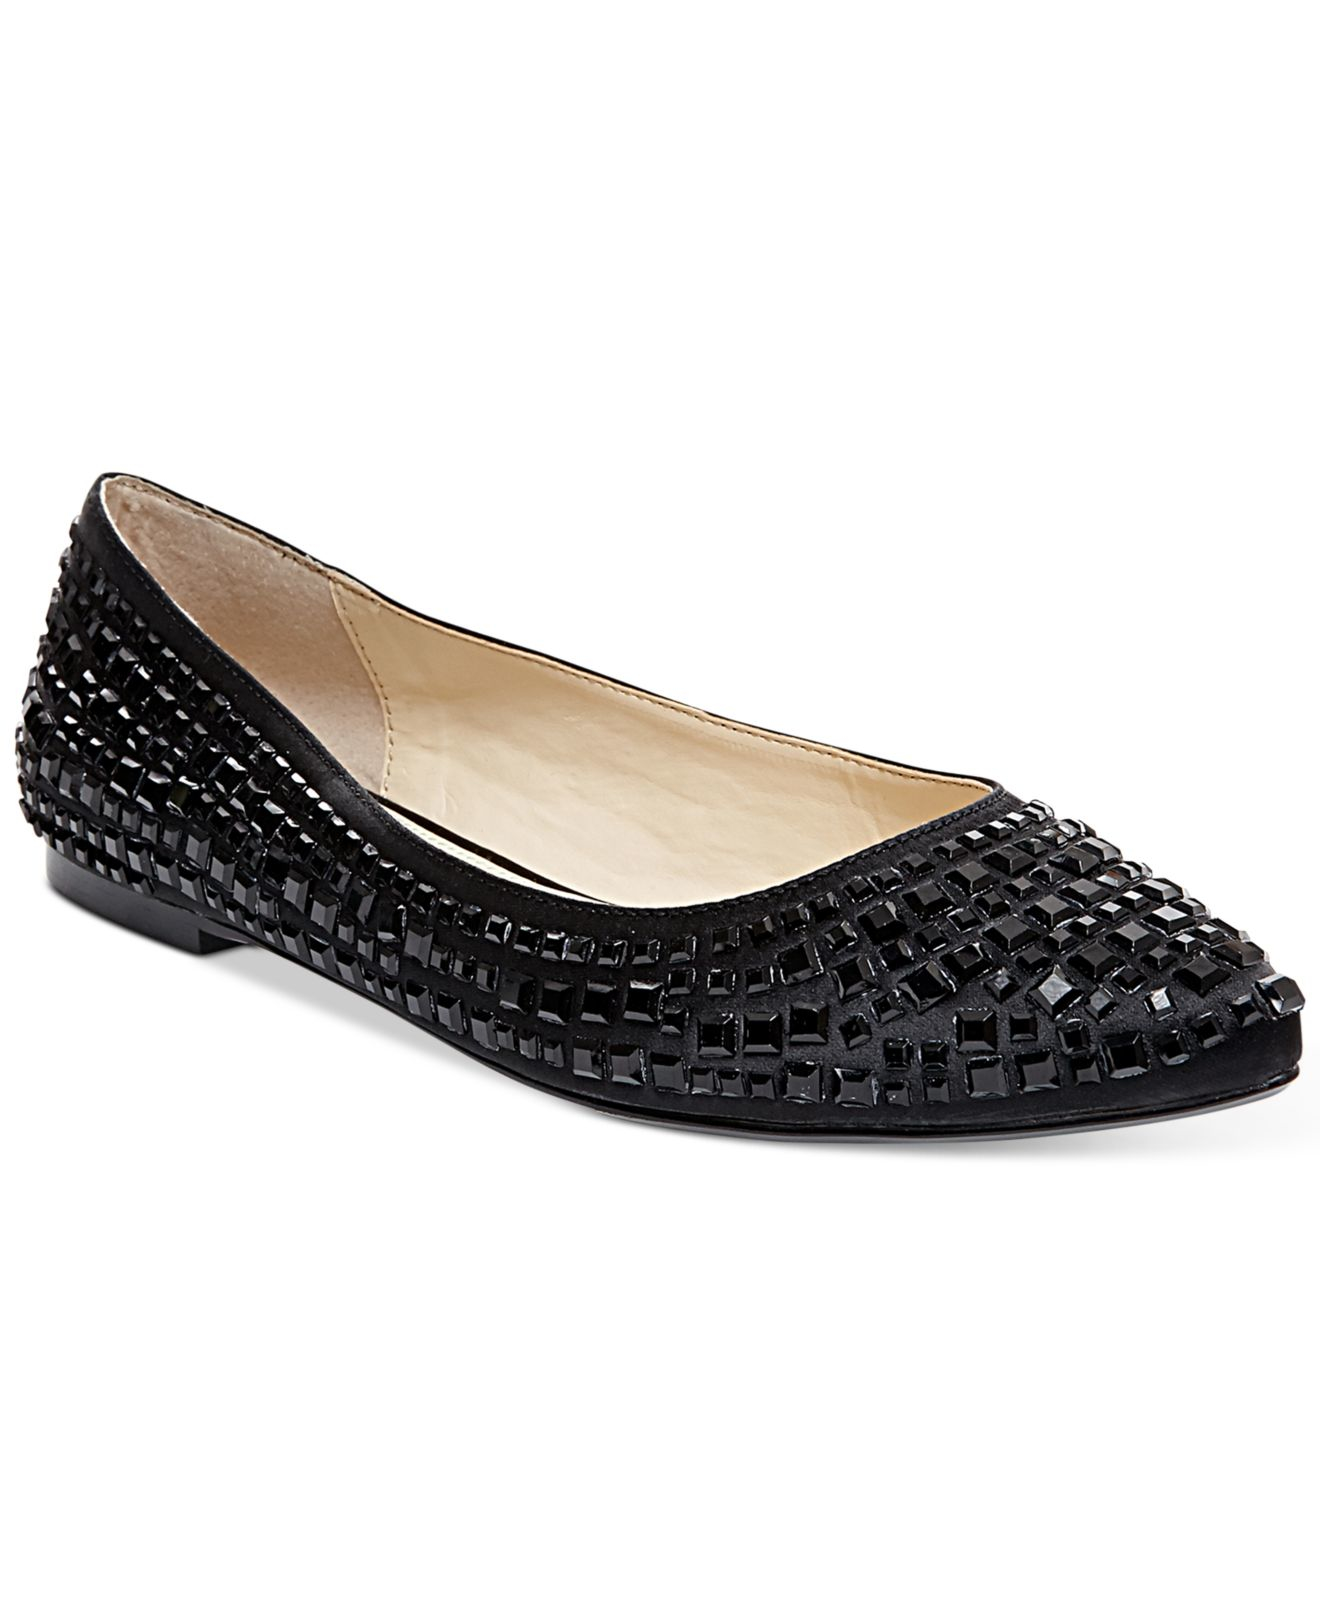 Betsey Johnson Satin Coco Evening Flats in Black - Lyst